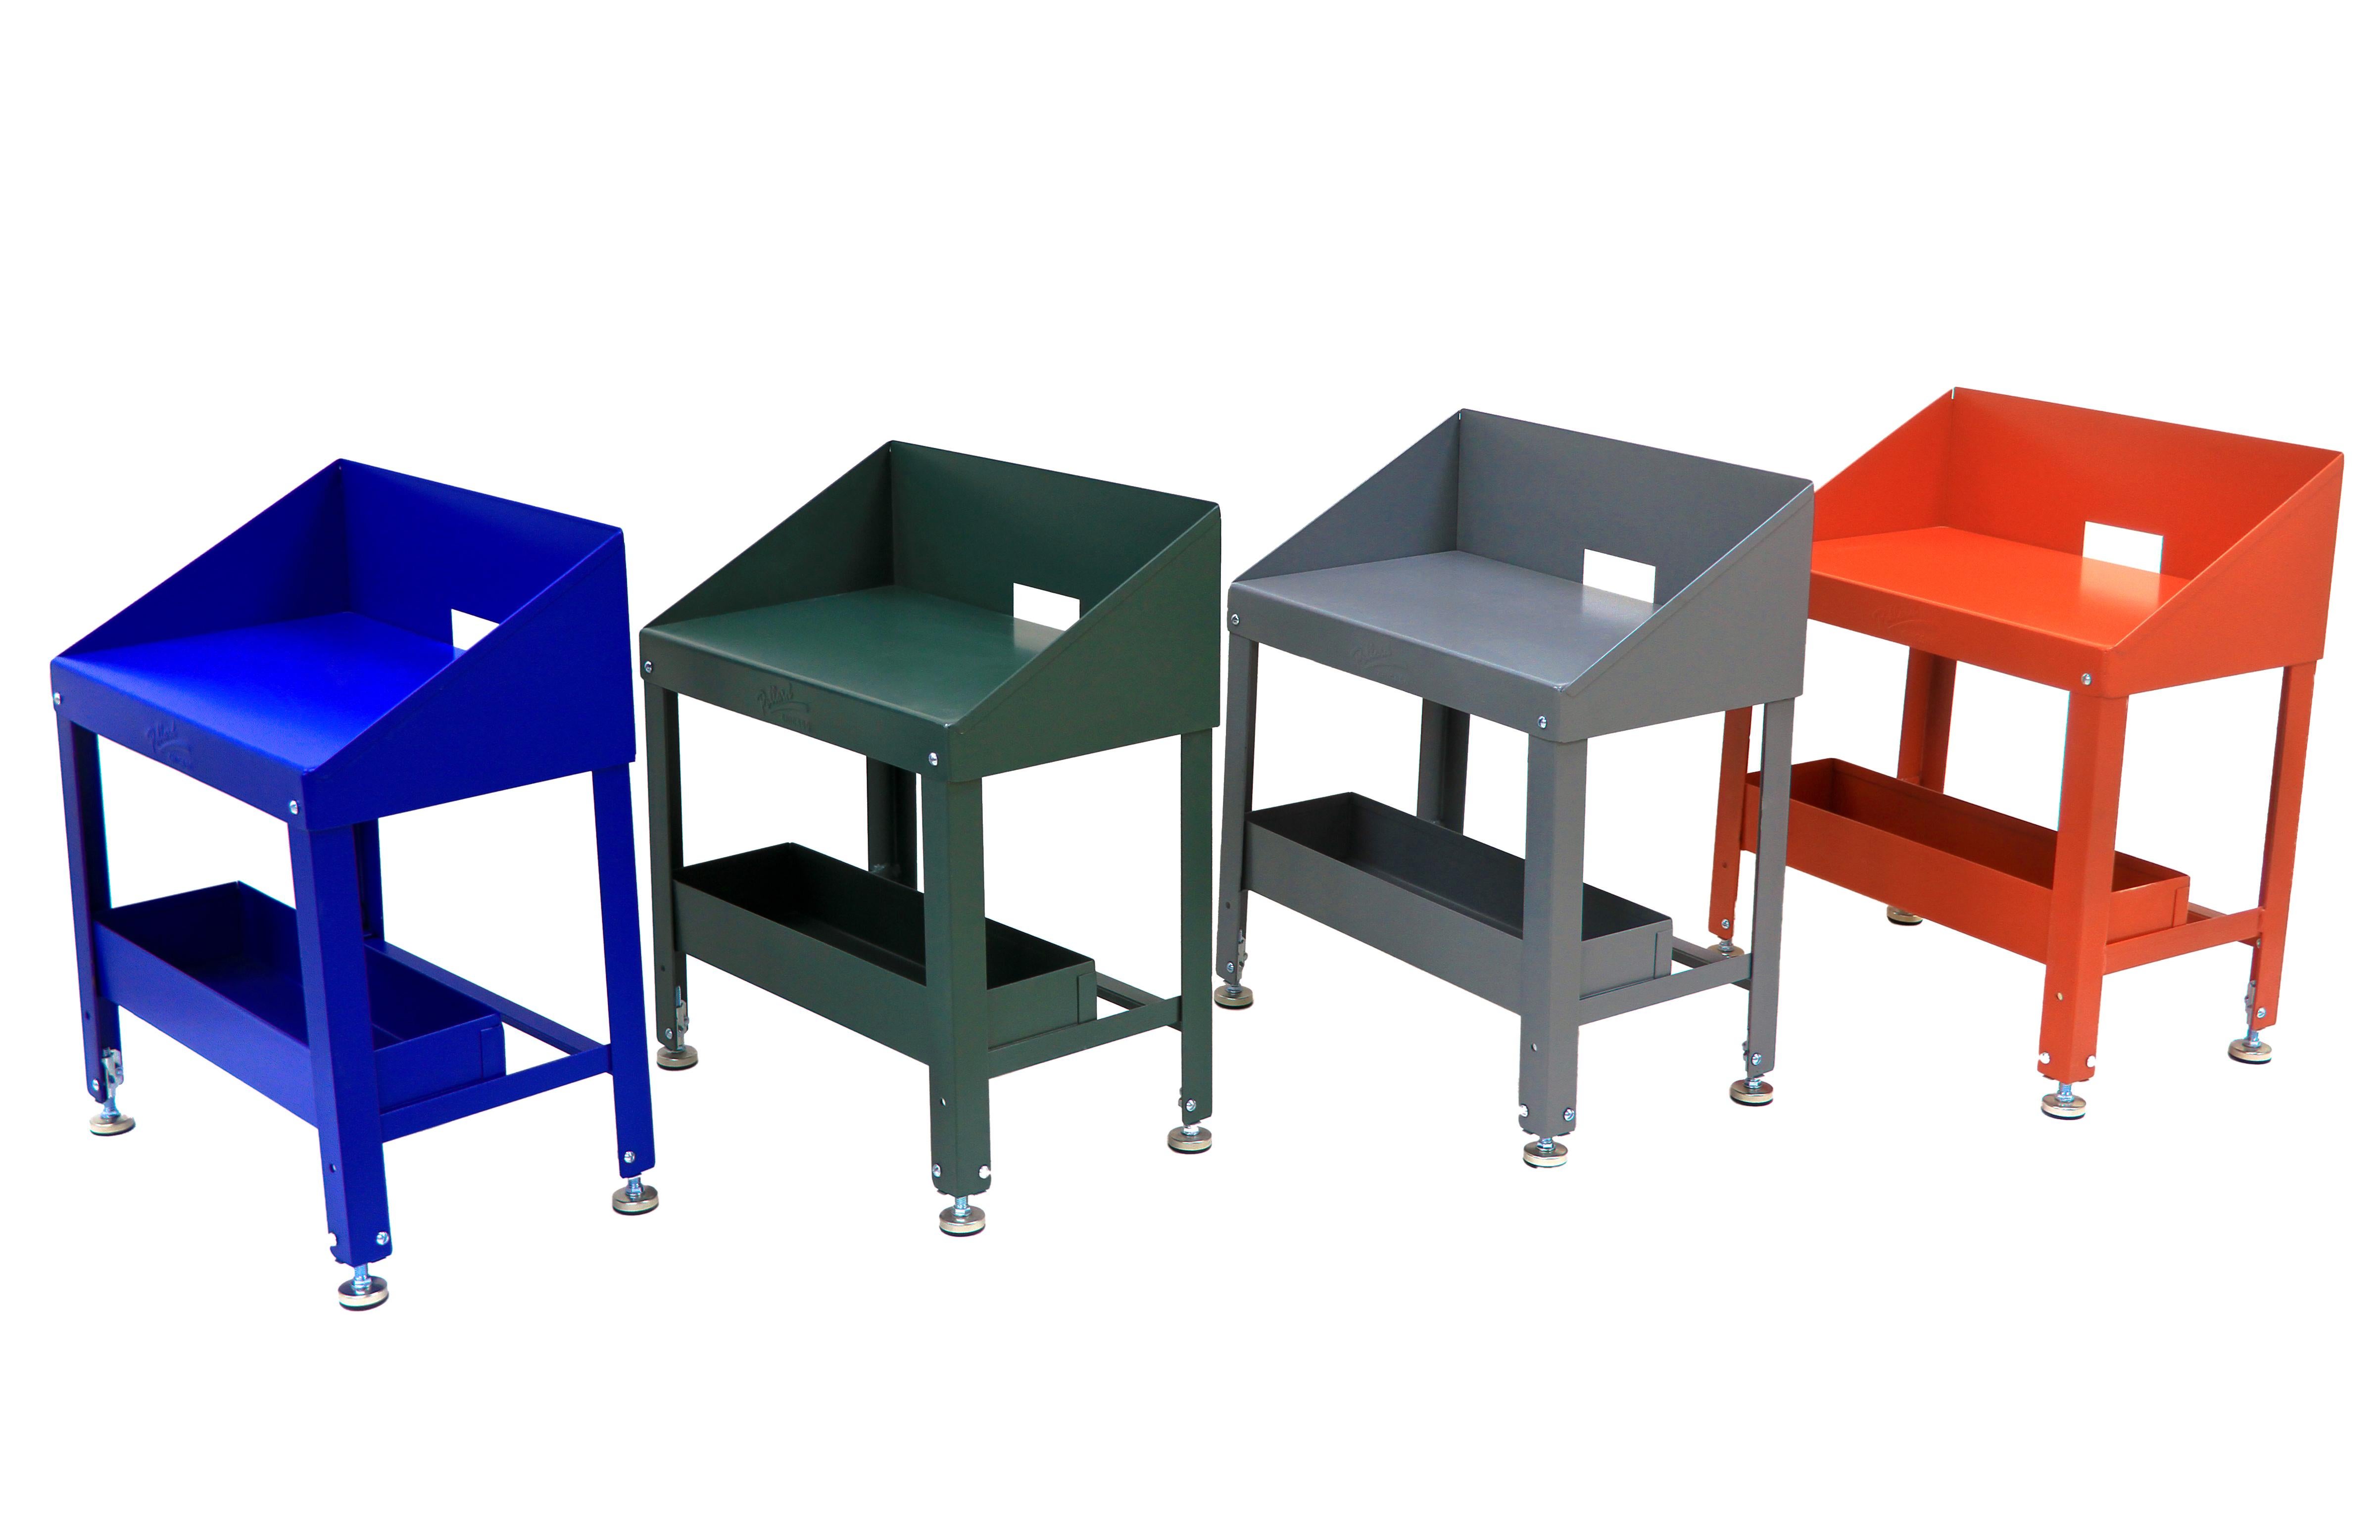 The 101 Side Table is made from 18 gauge steel and is enamel painted. The table features adjustable screw feet and a small cutout for cords. A removable utility box sits below for additional storage.

Our manufacturer fabricates the side table